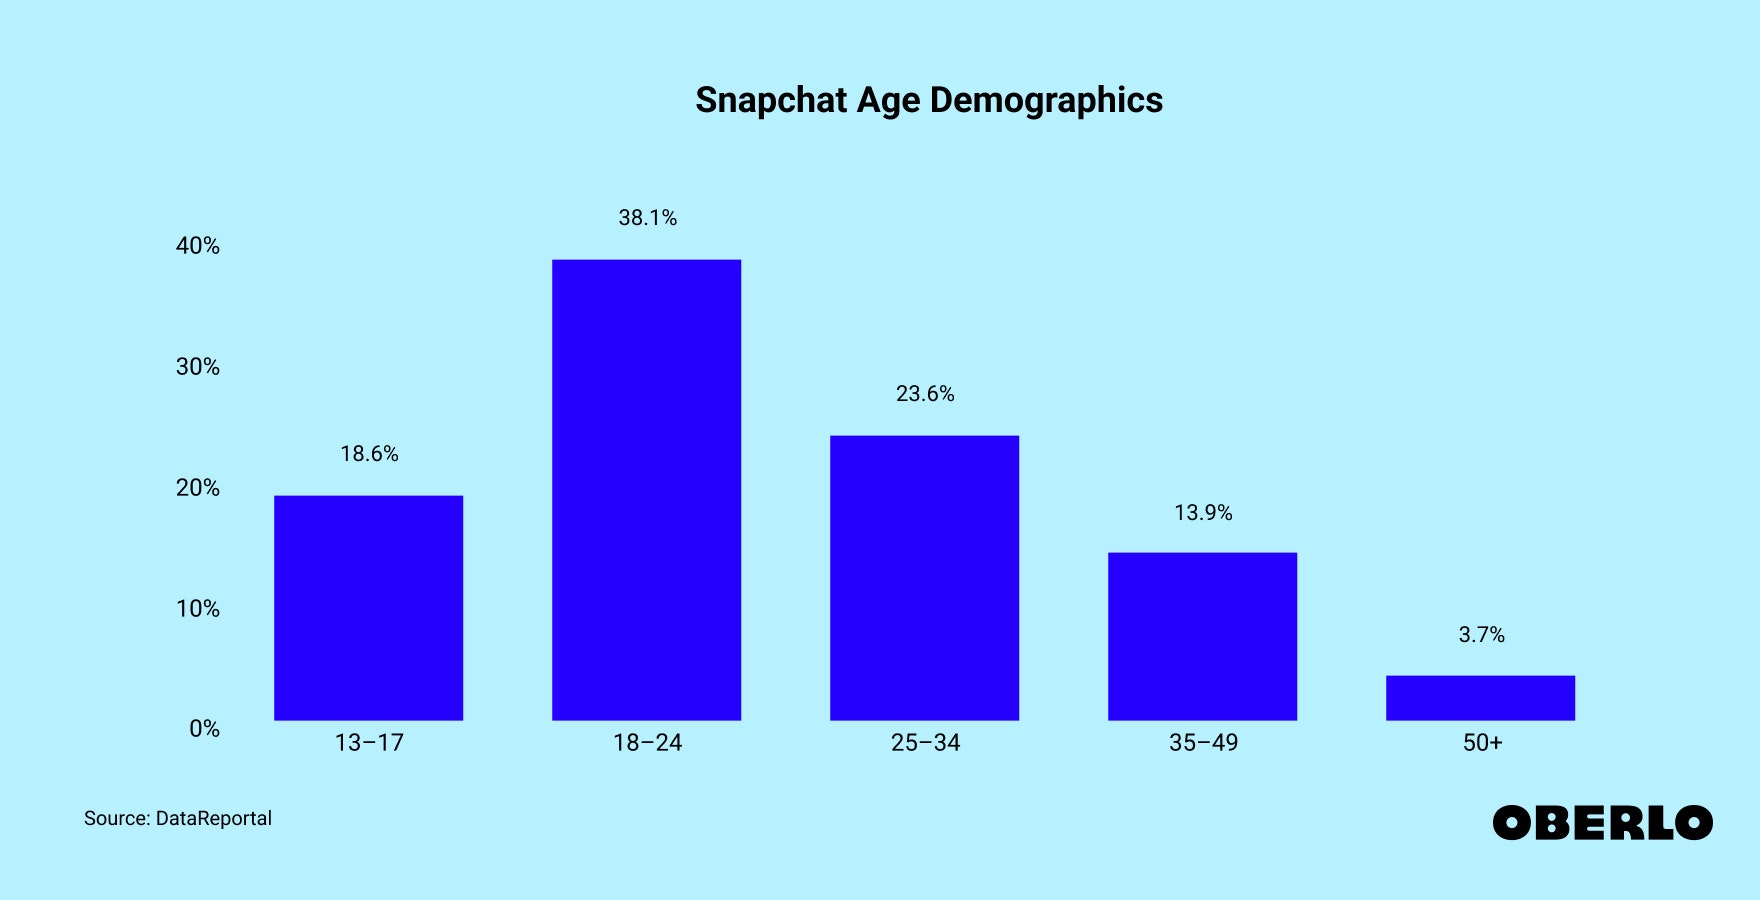 Chart showing Snapchat Age Demographics where one-third of its users are between 18 and 24 years old